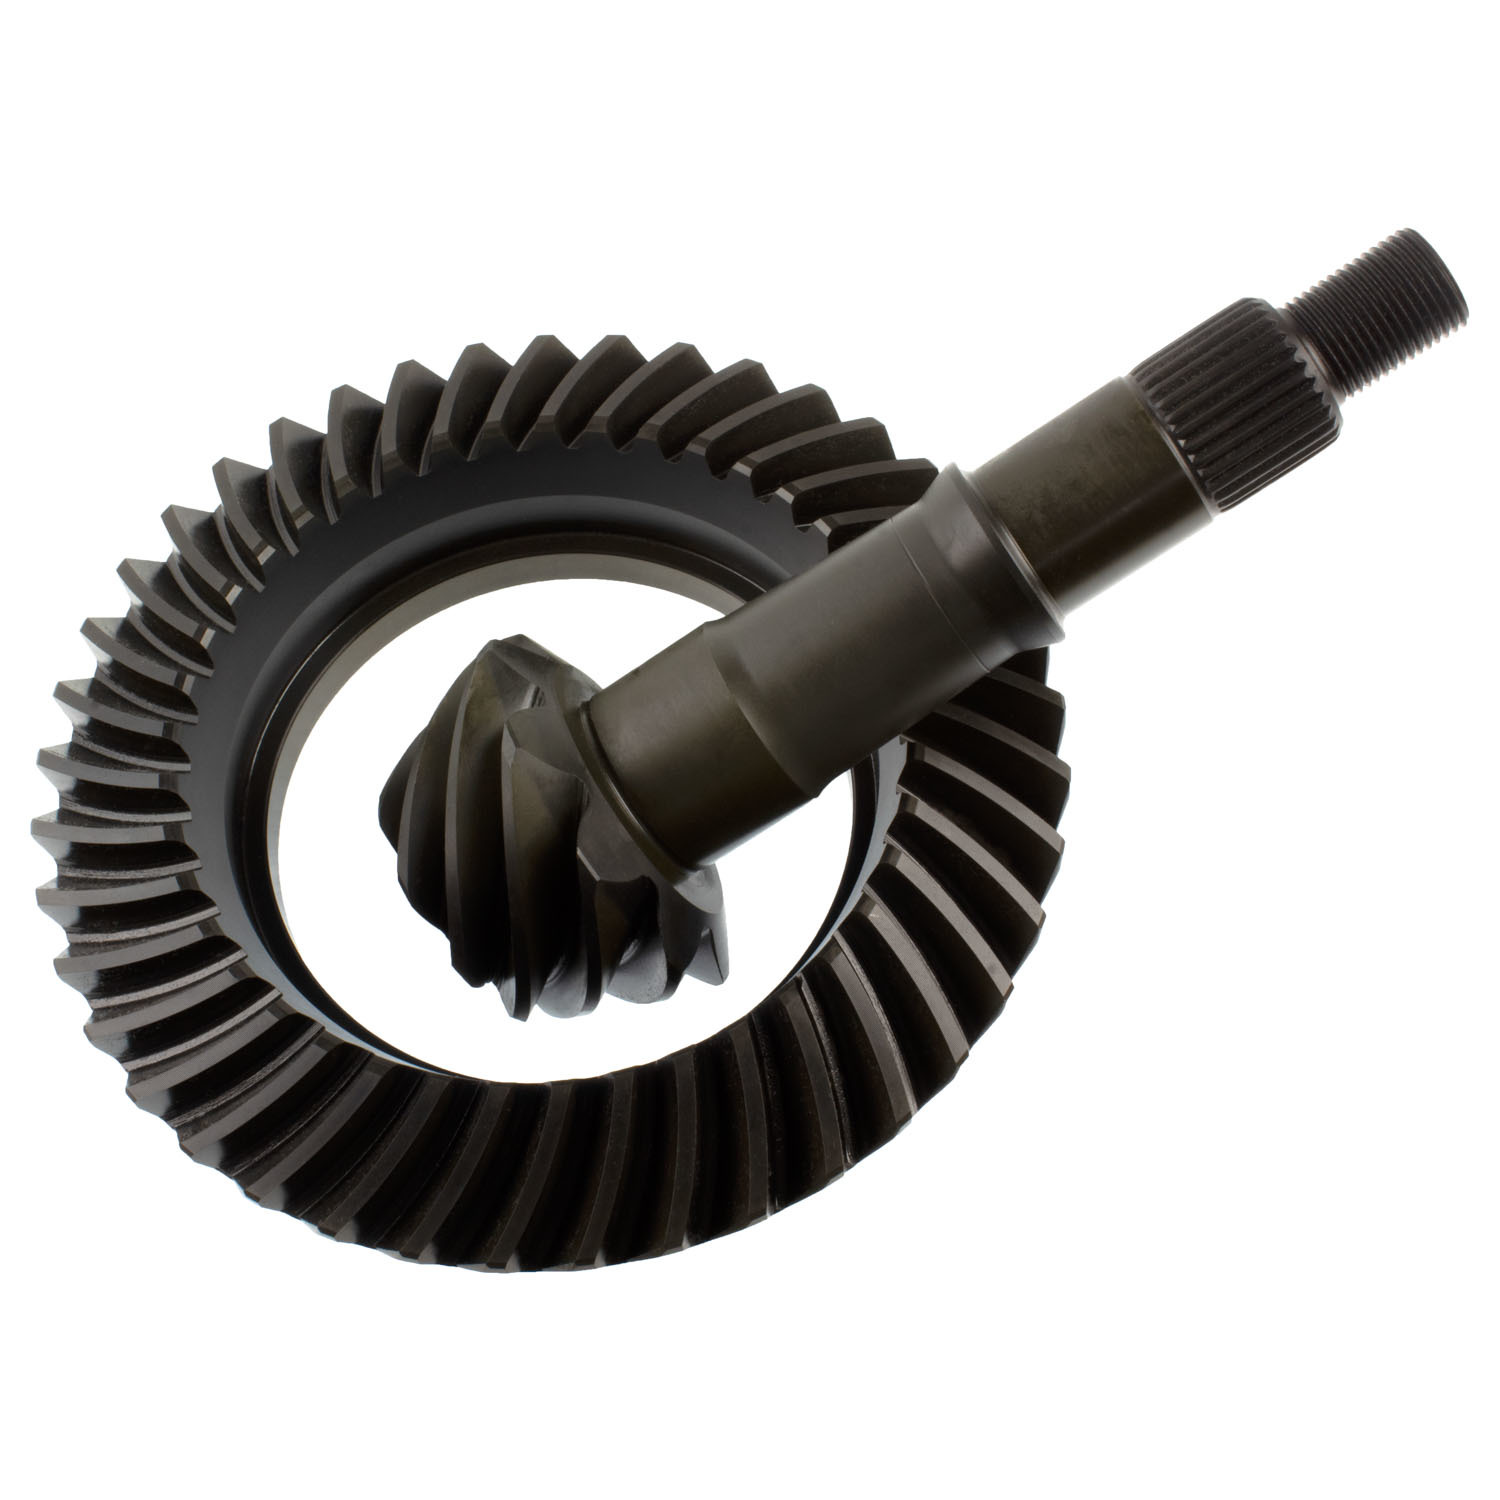 Richmond Gear GM85456 - Ring and Pinion, Excel, 4.56 Ratio, 30 Spline Pinion, 3 Series, 8.5 in / 8.6 in, GM 10-Bolt, Kit